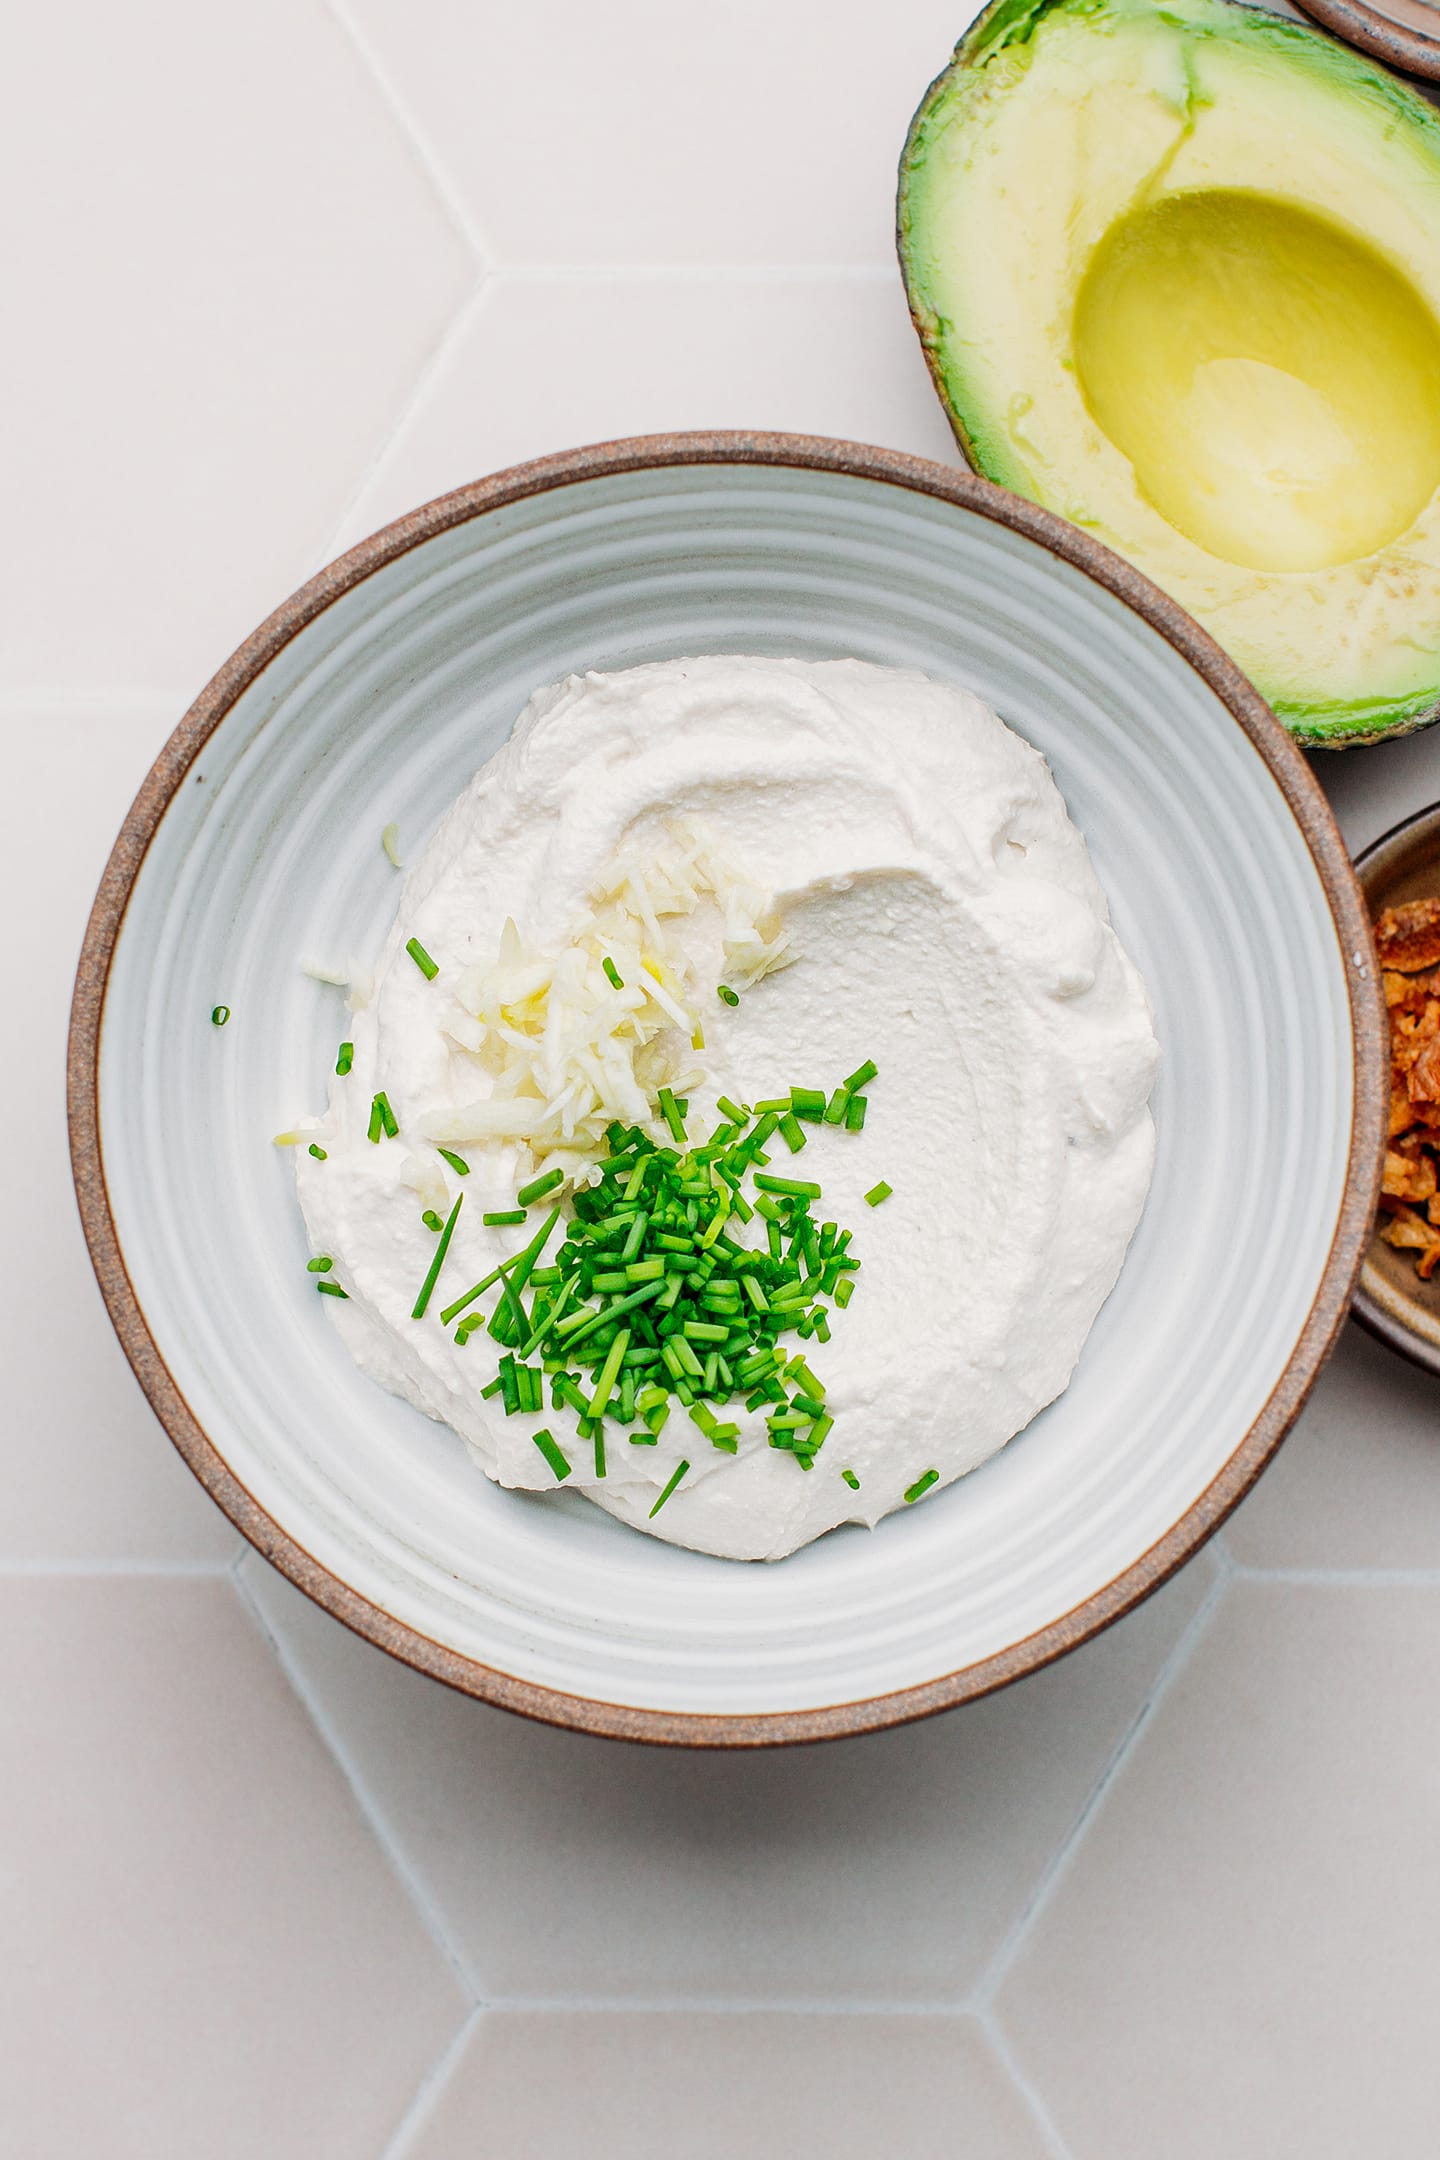 Cream cheese, garlic, and chives in a bowl.